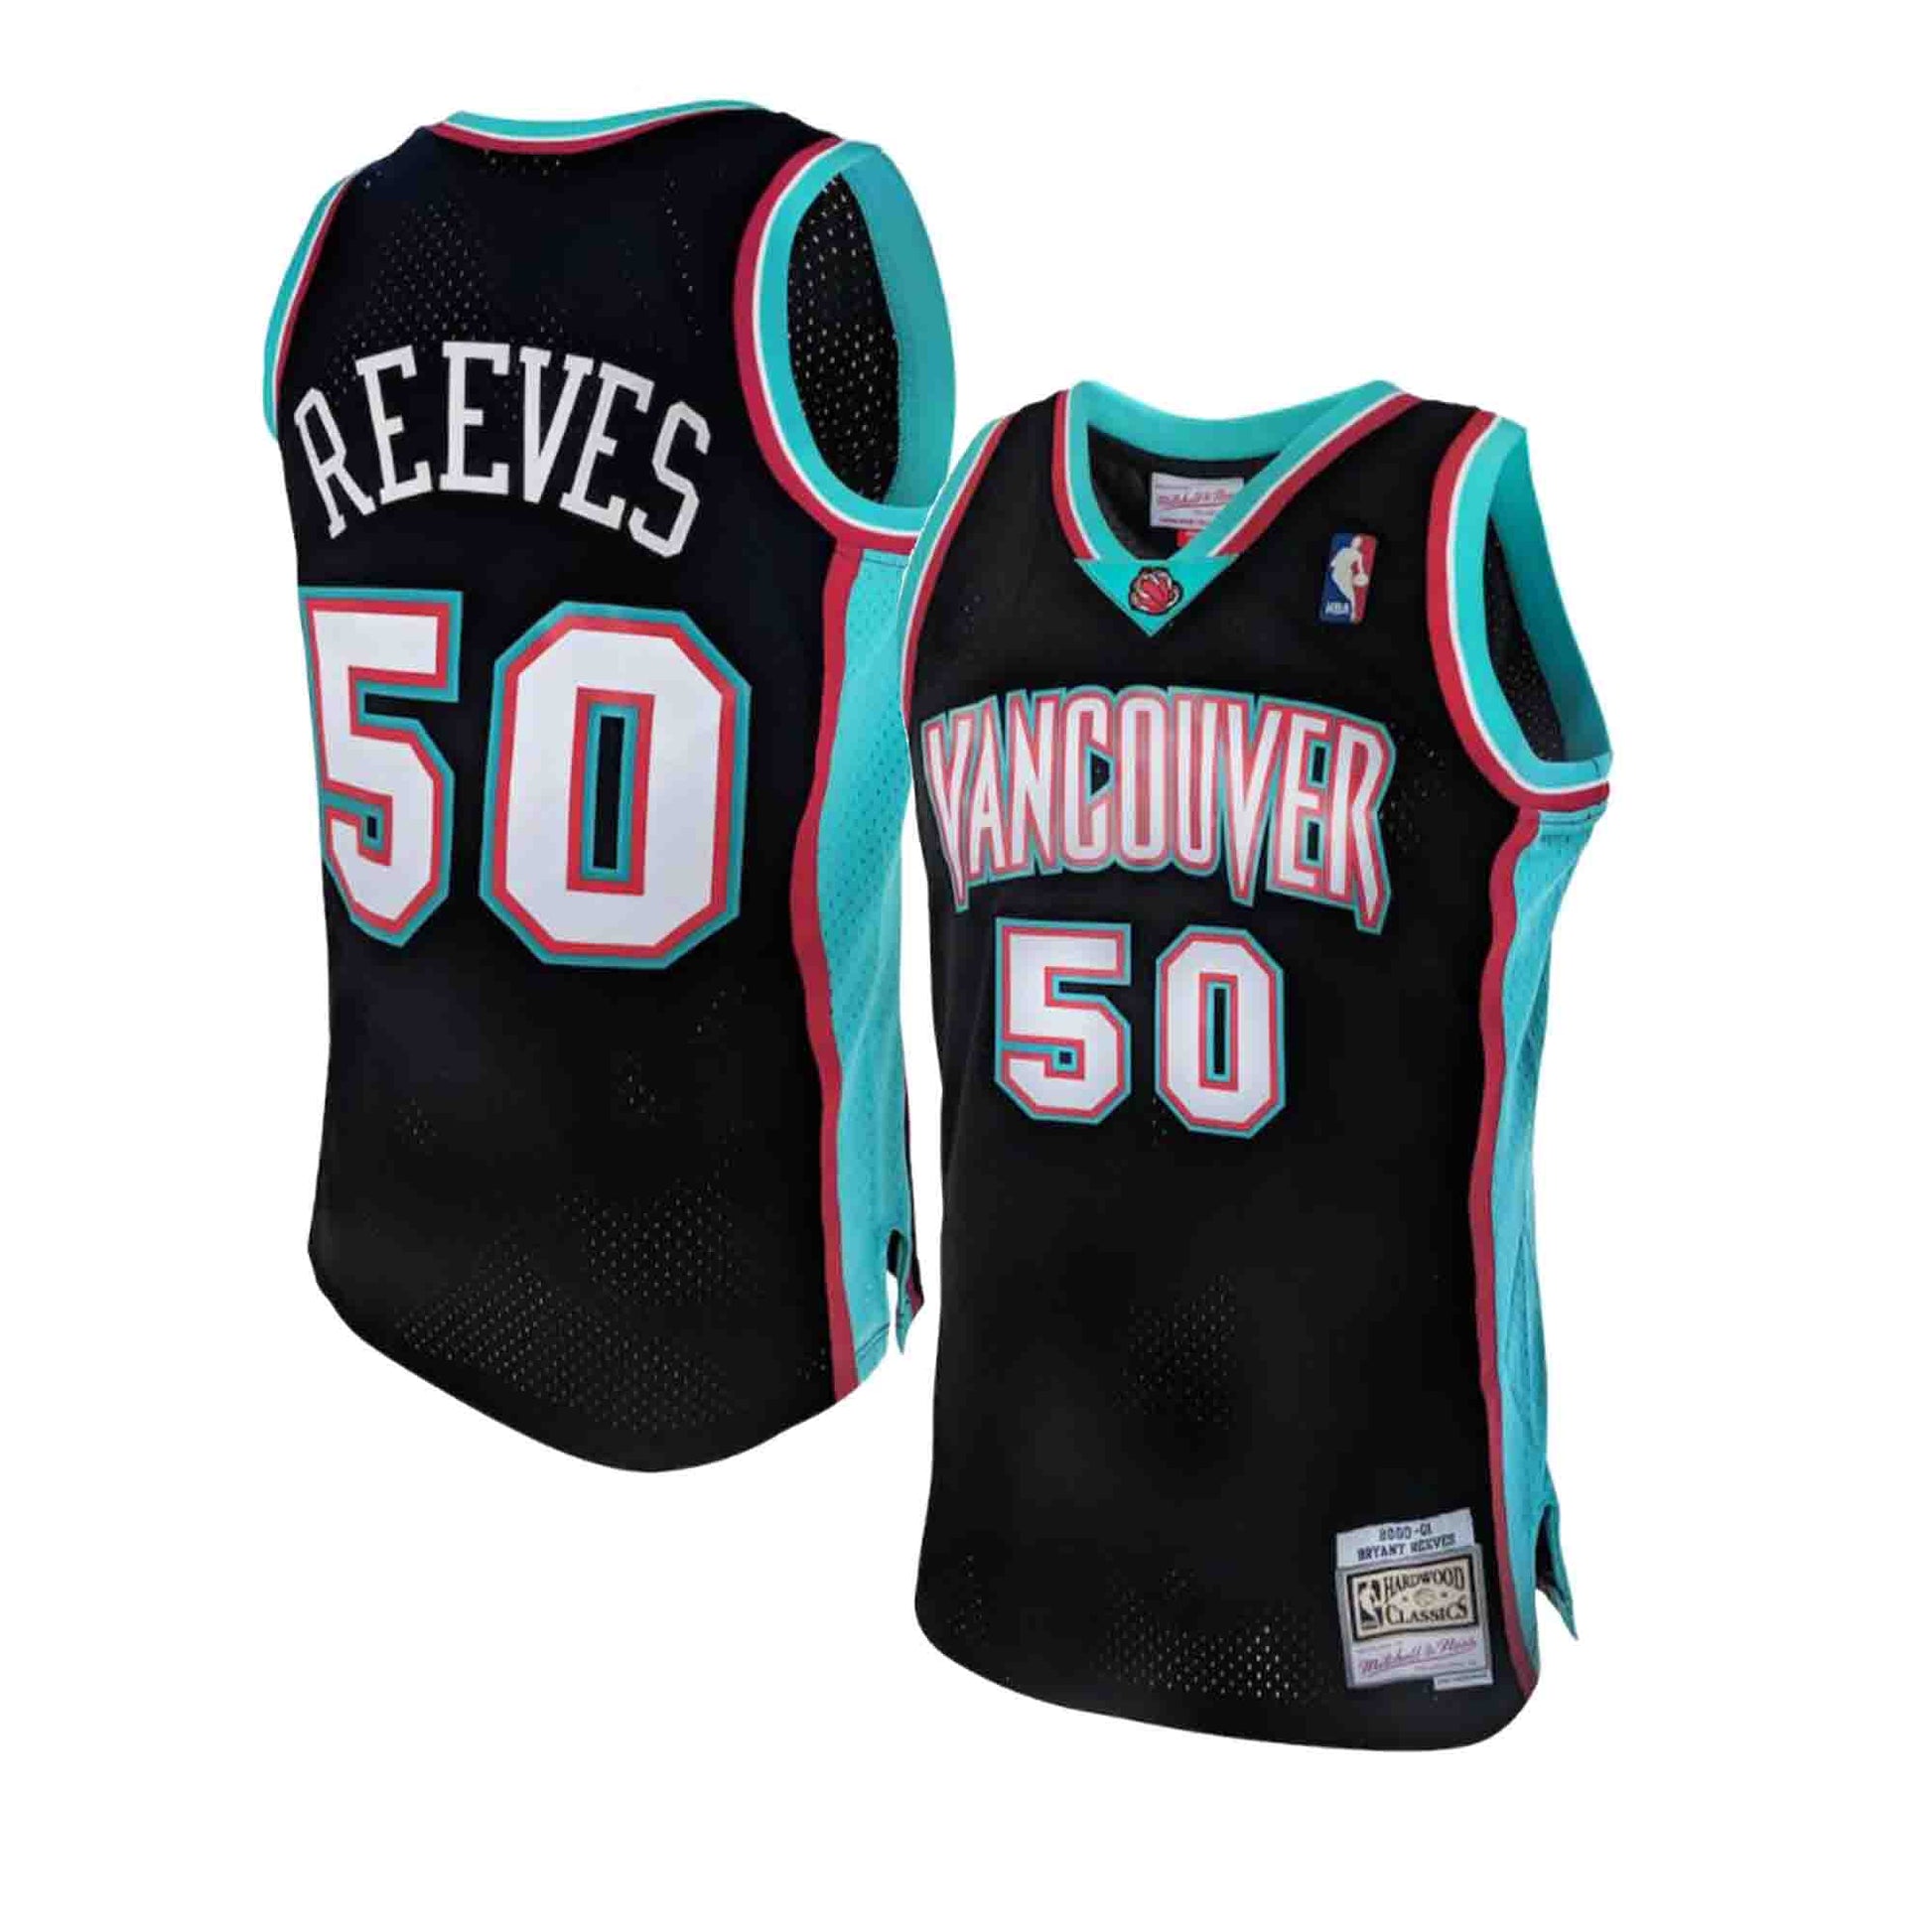 Grizzlies are bringing back logo, jerseys from their Vancouver